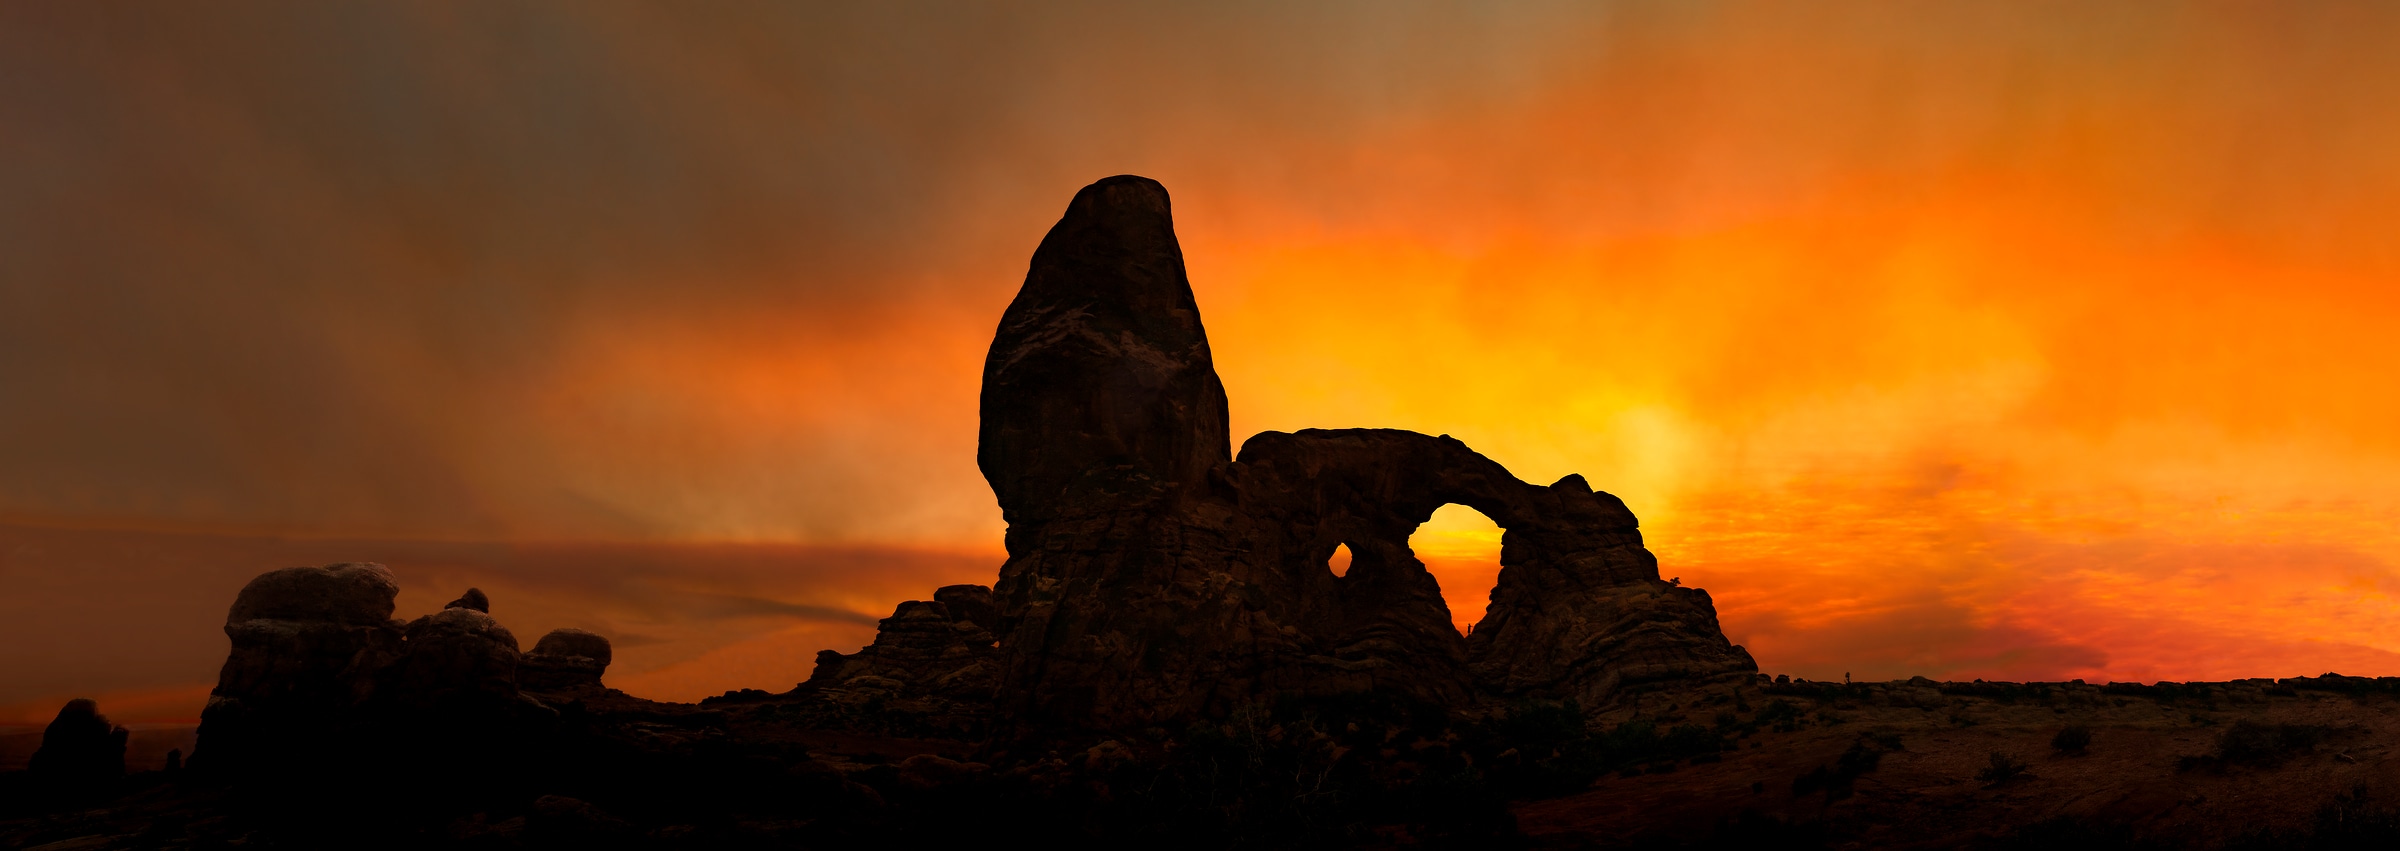 276 megapixels! A very high resolution, large-format VAST photo print of rock formations at sunset in Arches National Park; landscape photograph created by David David in Utah